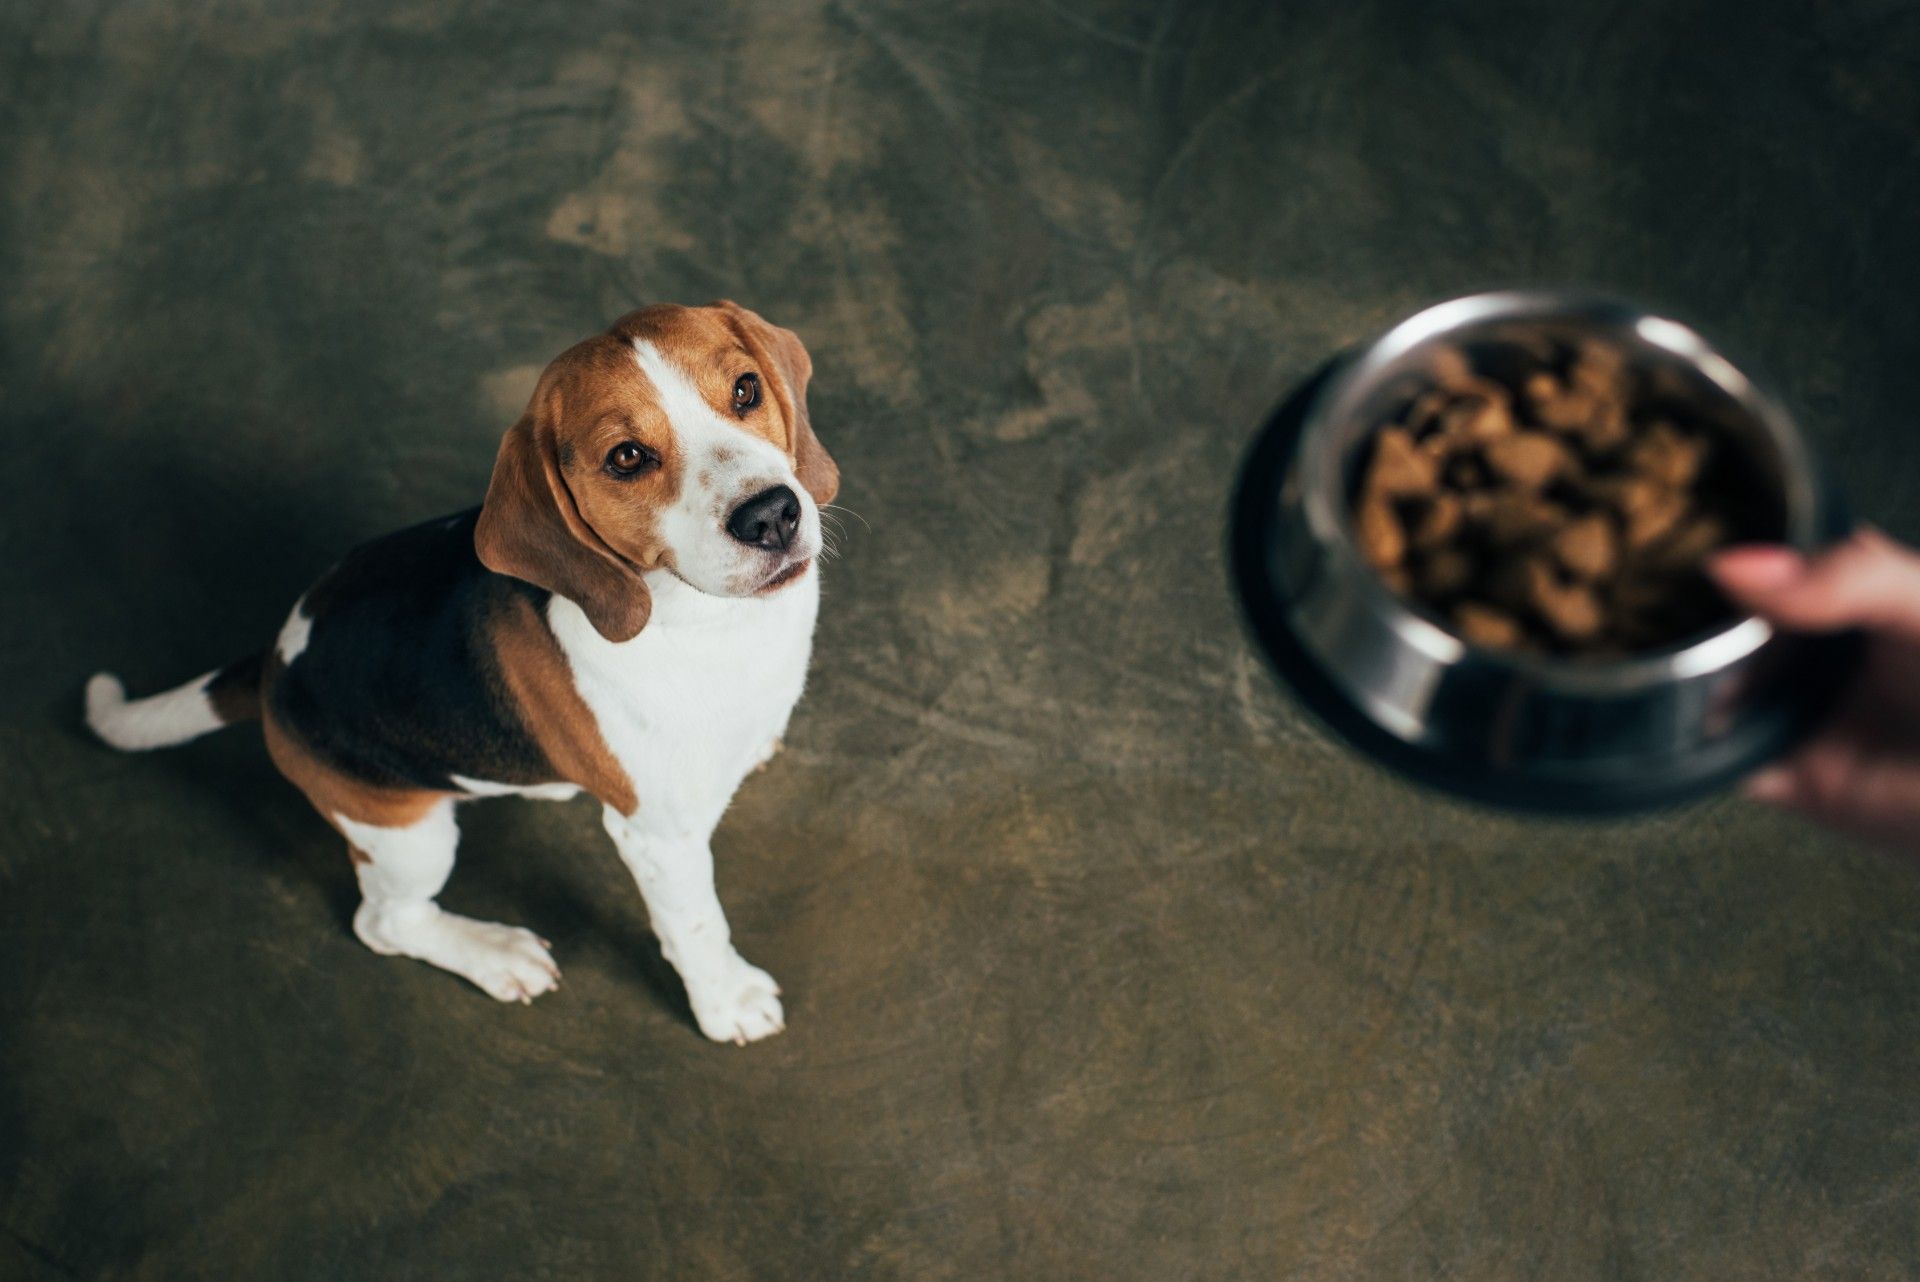 A beagle sits and waits as a person holds a dog food bowl out above it - dog food recall